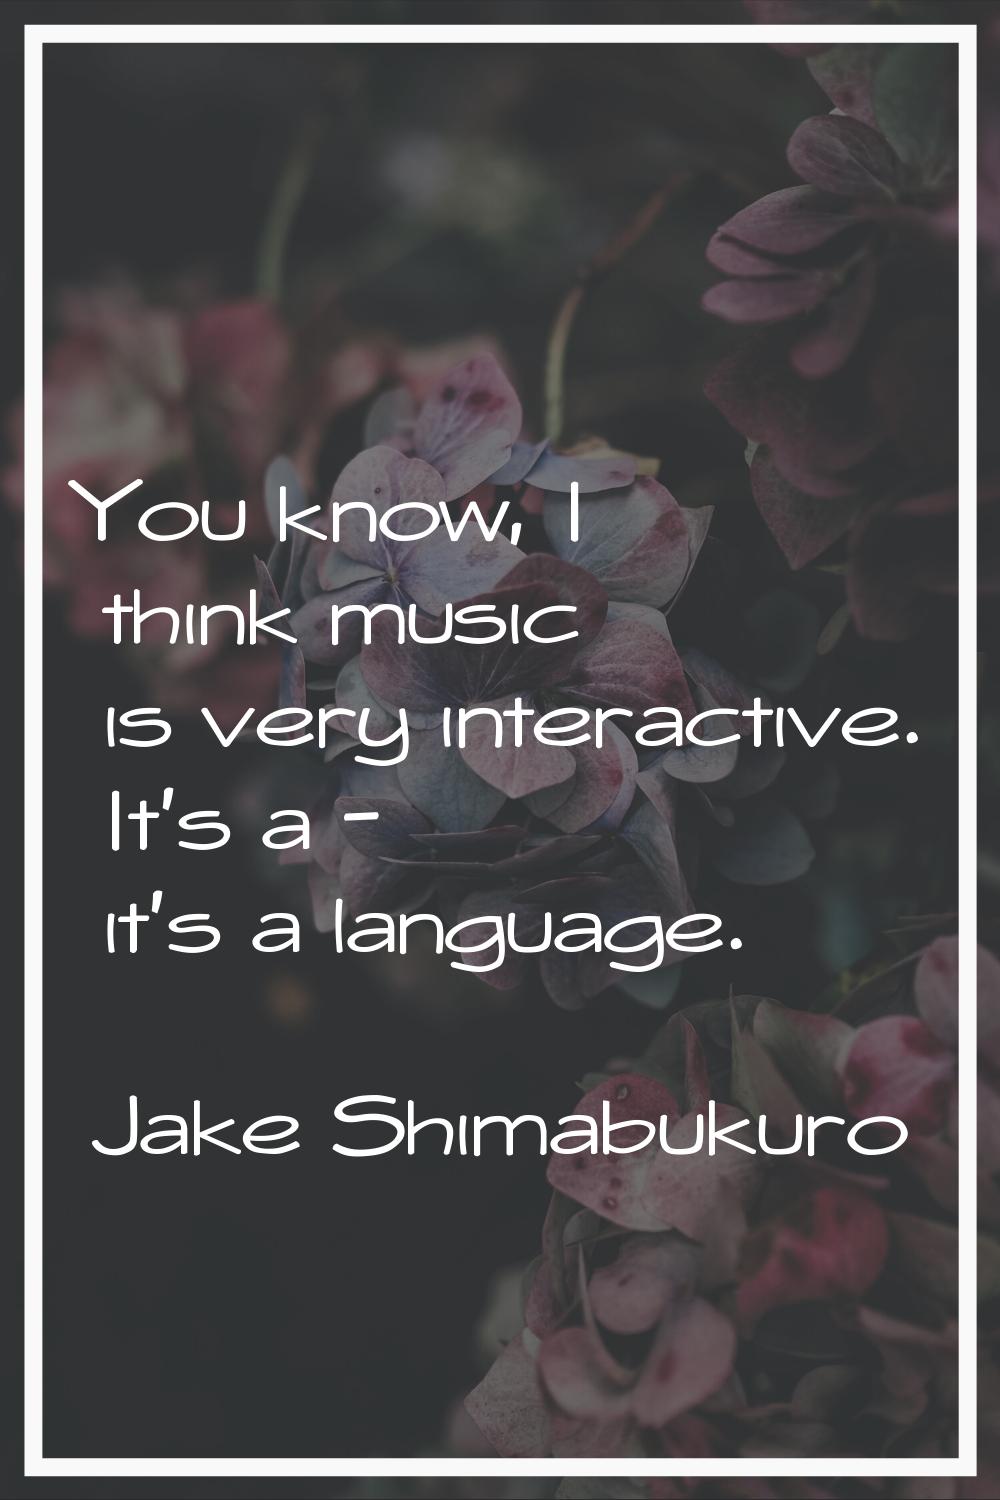 You know, I think music is very interactive. It's a - it's a language.